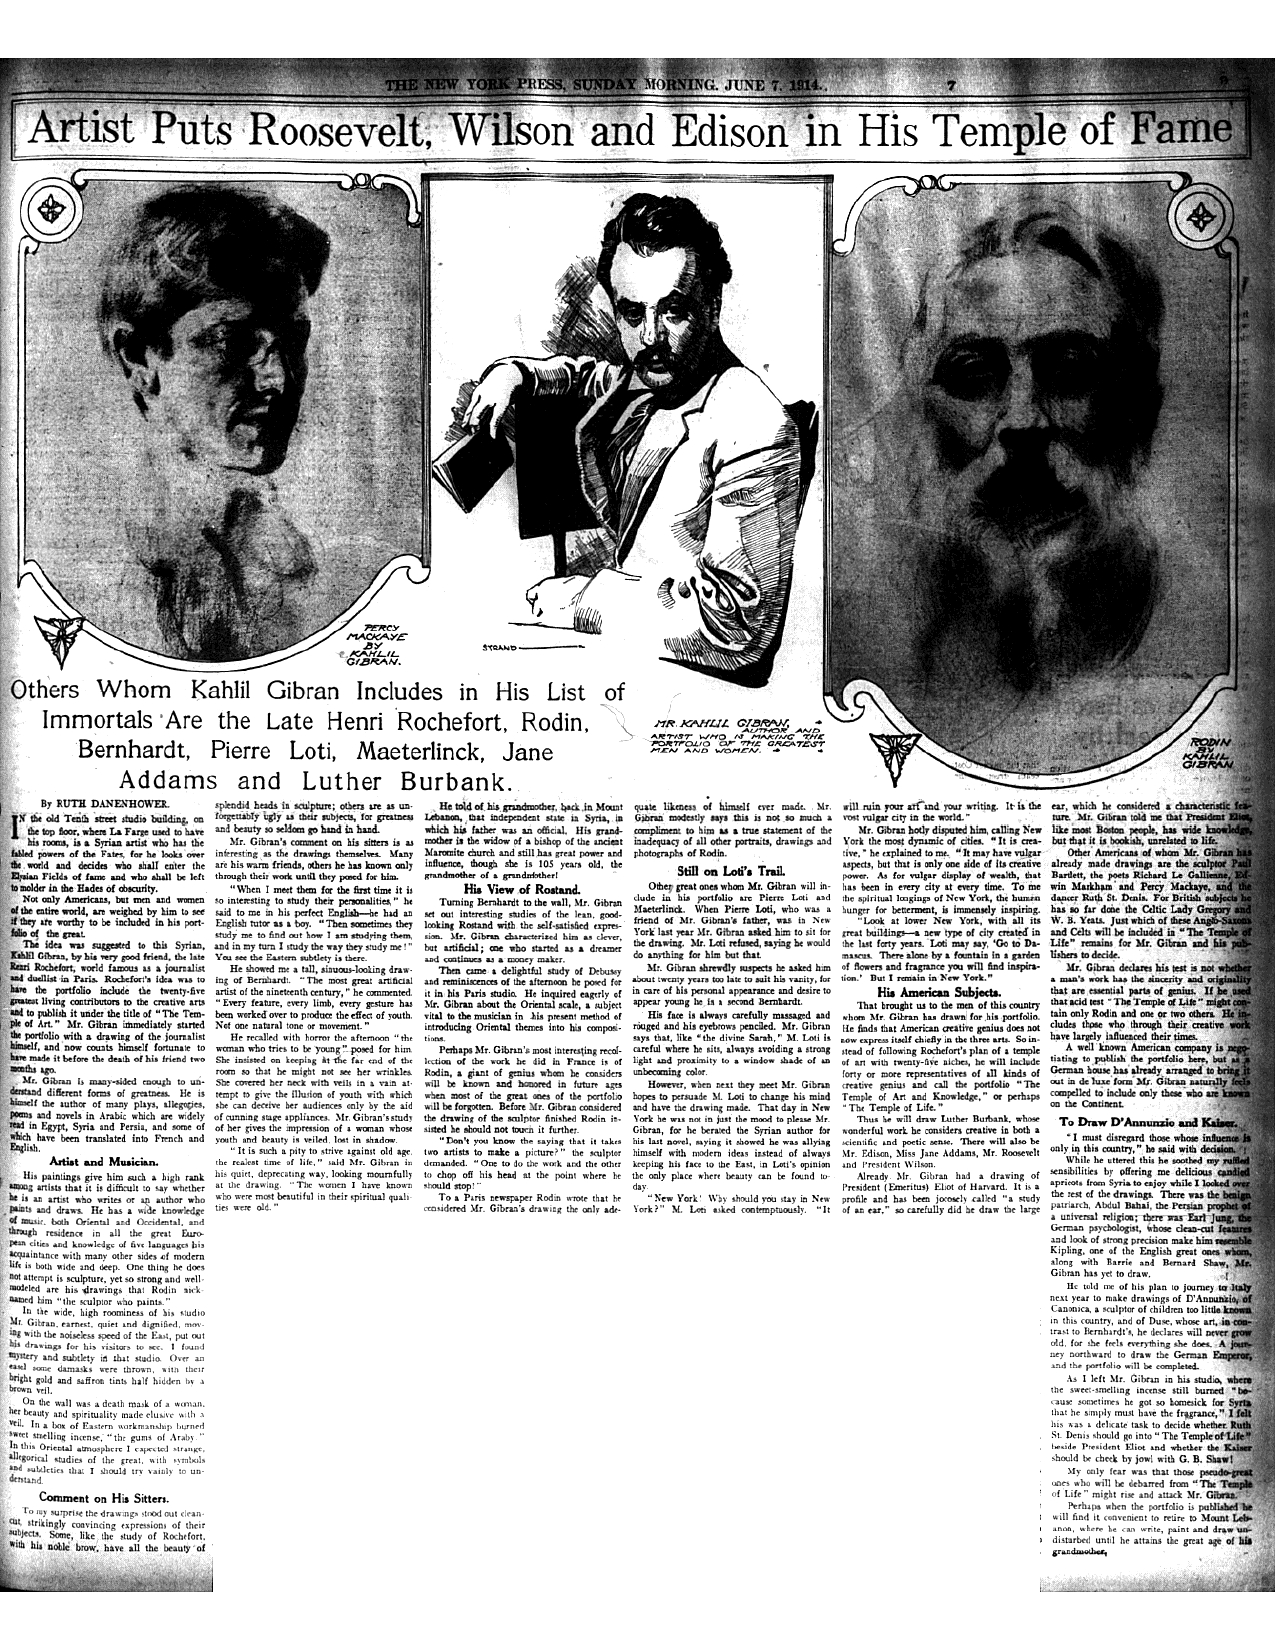 Ruth Danenhower, Artist Puts Roosevelt, Wilson and Edison in His Temple of Fame, The New York Press, Sunday Morning, June 7, 1914